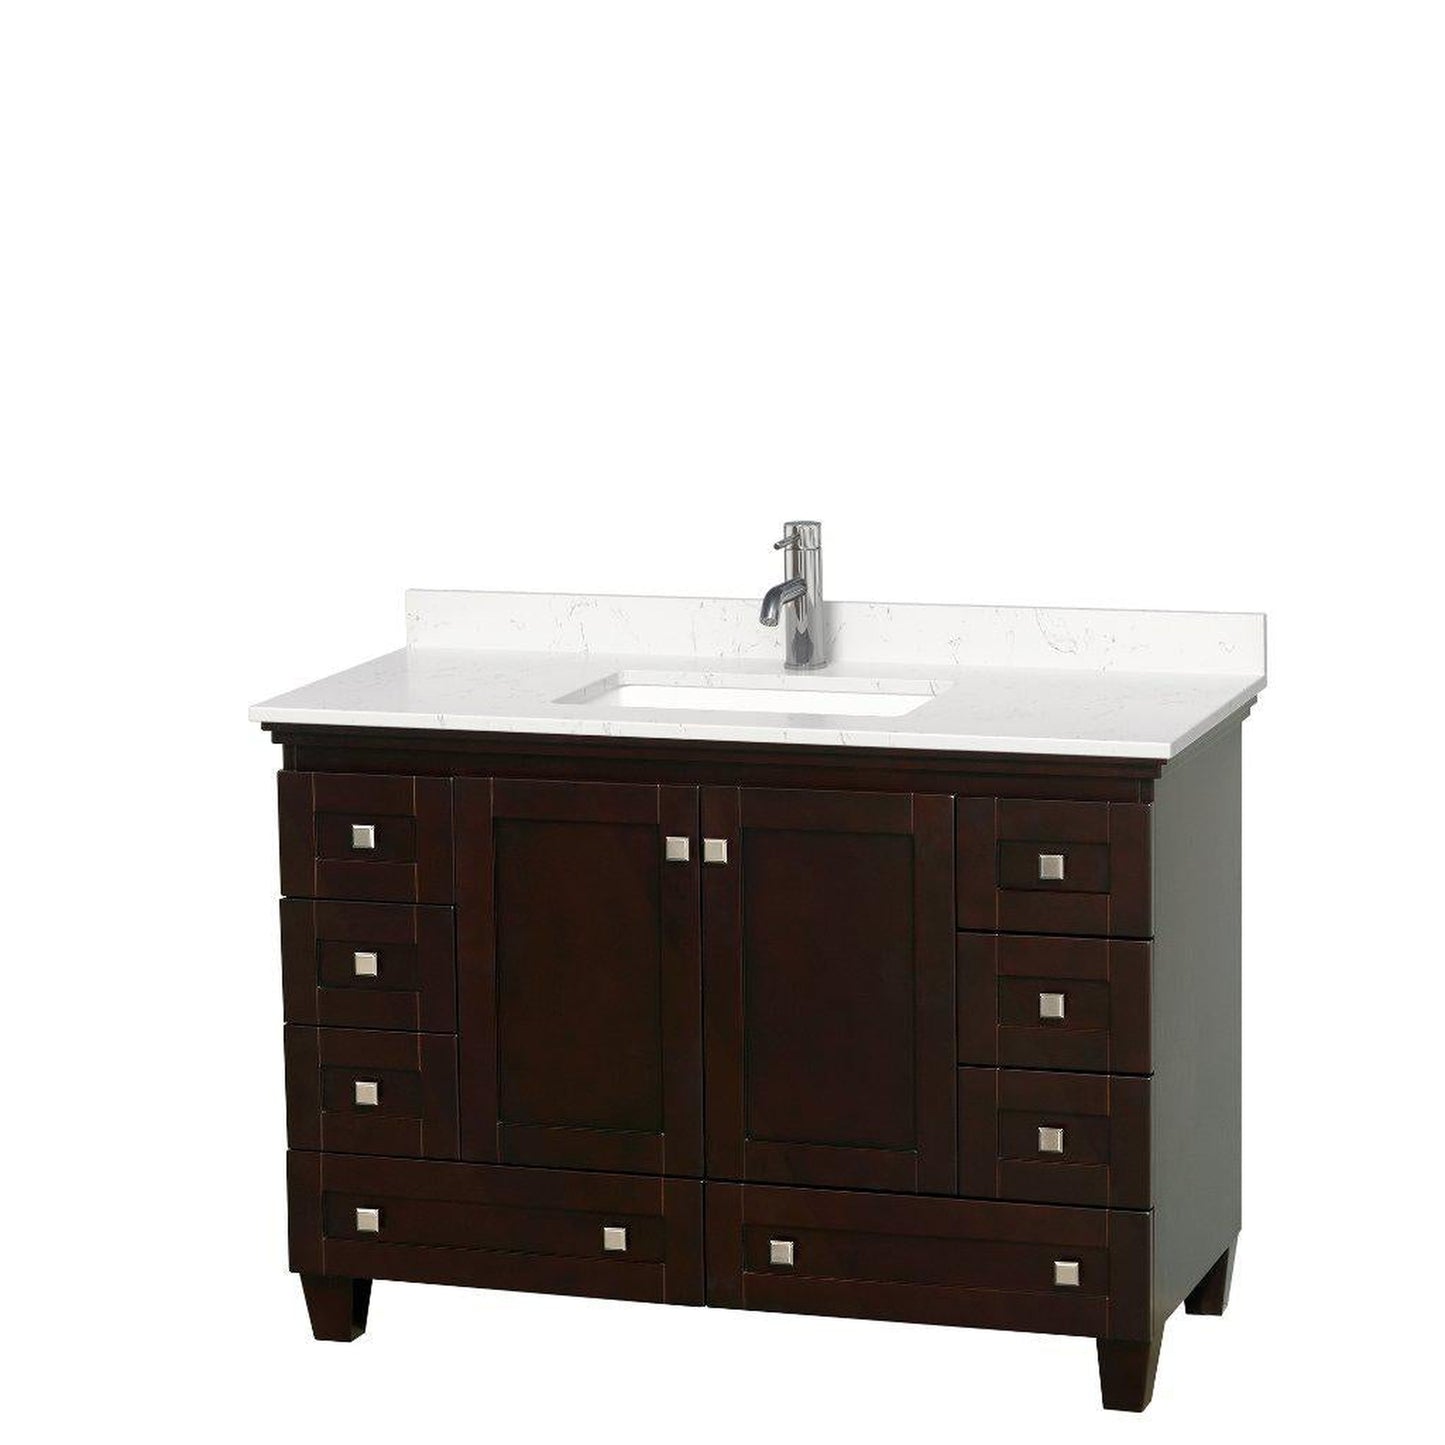 Wyndham Collection Acclaim 48" Single Bathroom Espresso Vanity With Light-Vein Carrara Cultured Marble Countertop And Undermount Square Sink